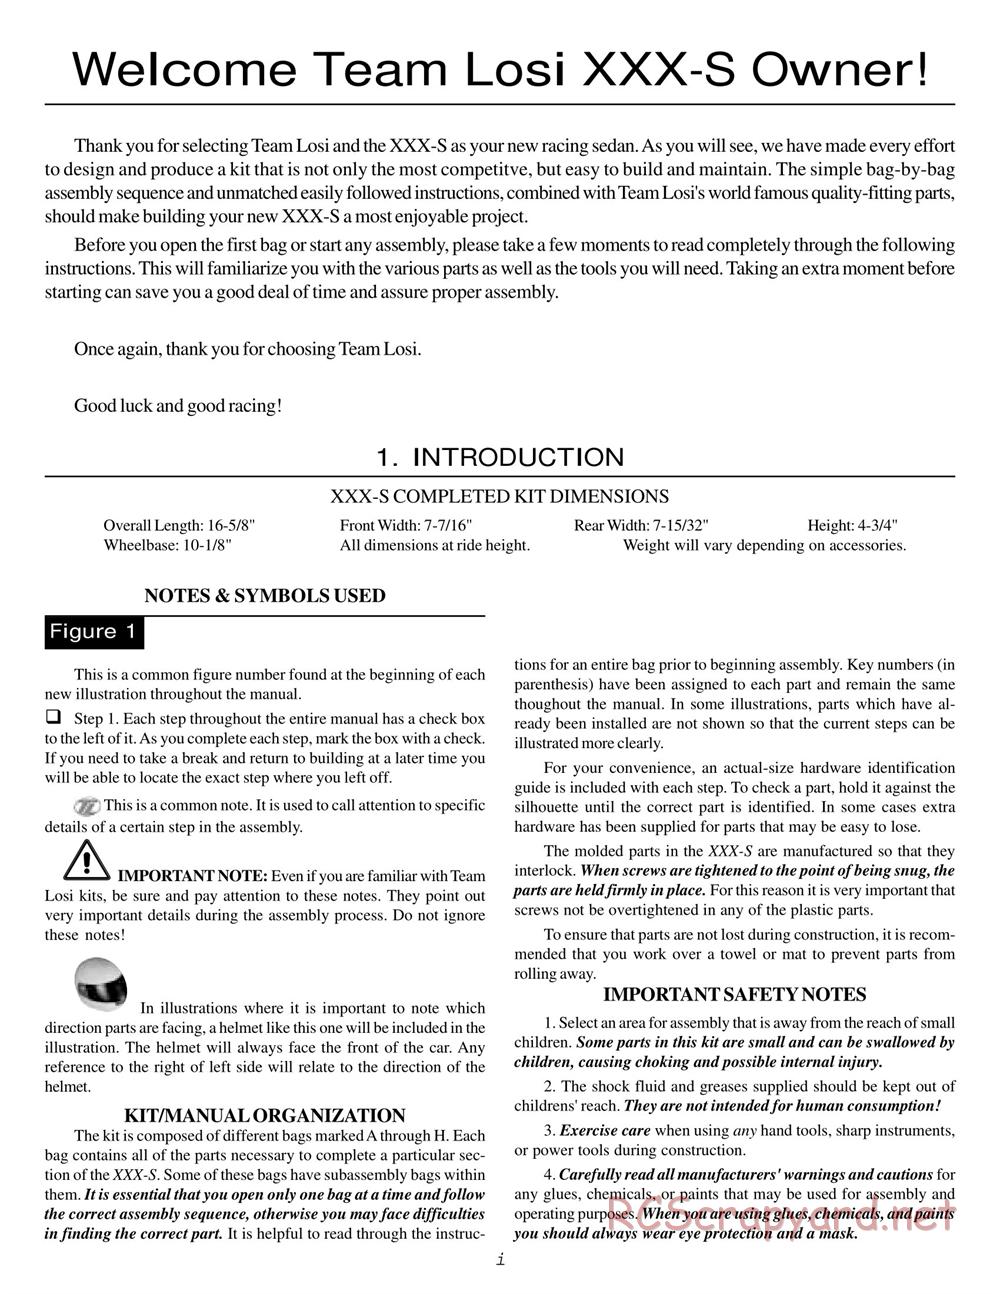 Team Losi - XXX-S - Manual - Page 2